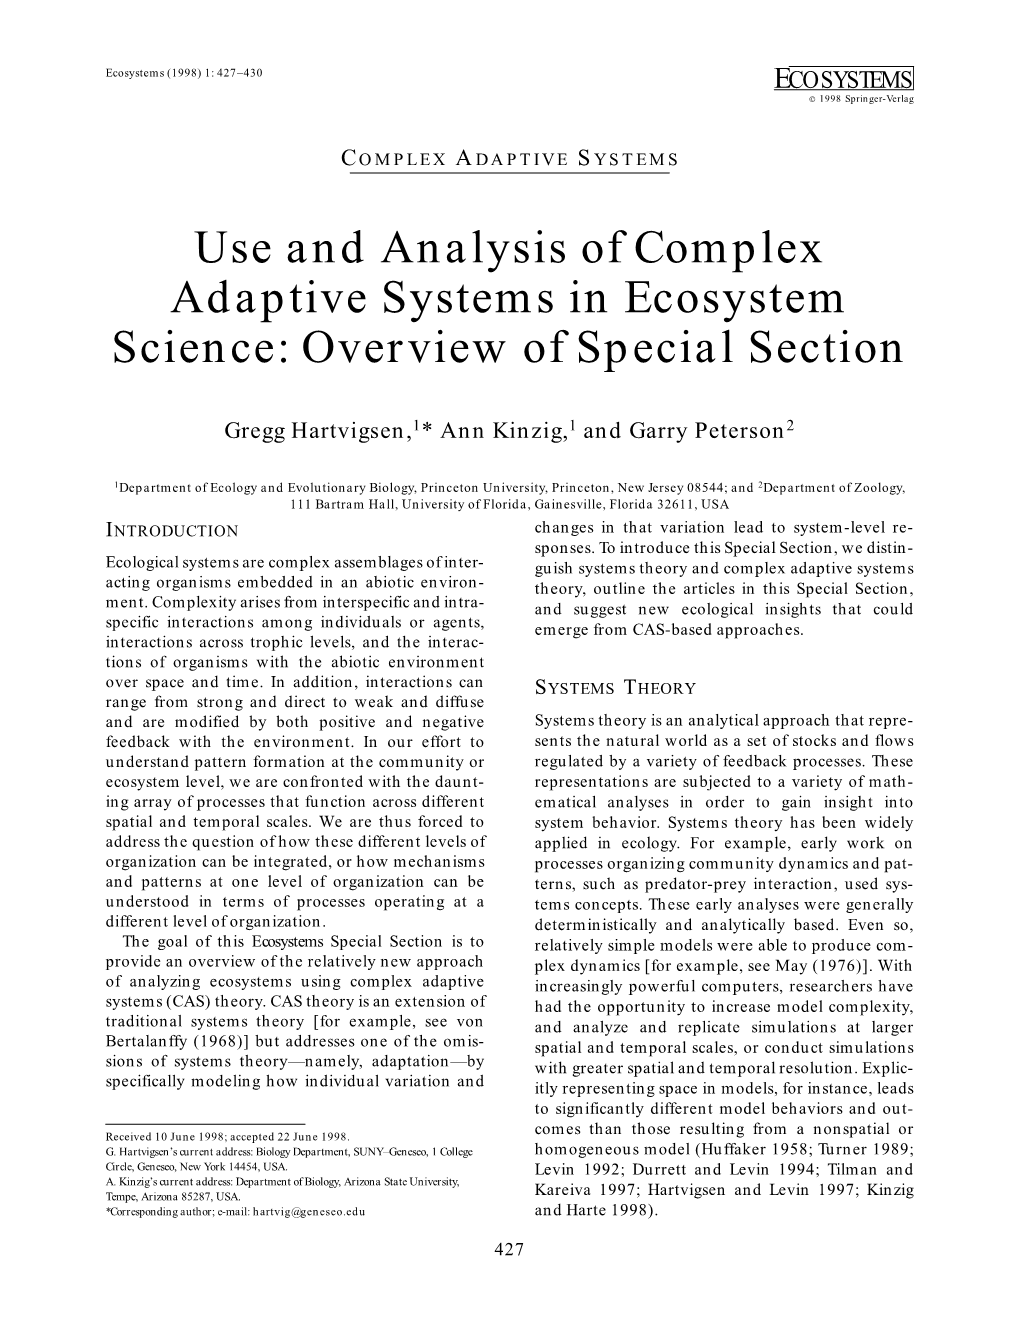 Use and Analysis of Complex Adaptive Systems in Ecosystem Science: Overview of Special Section